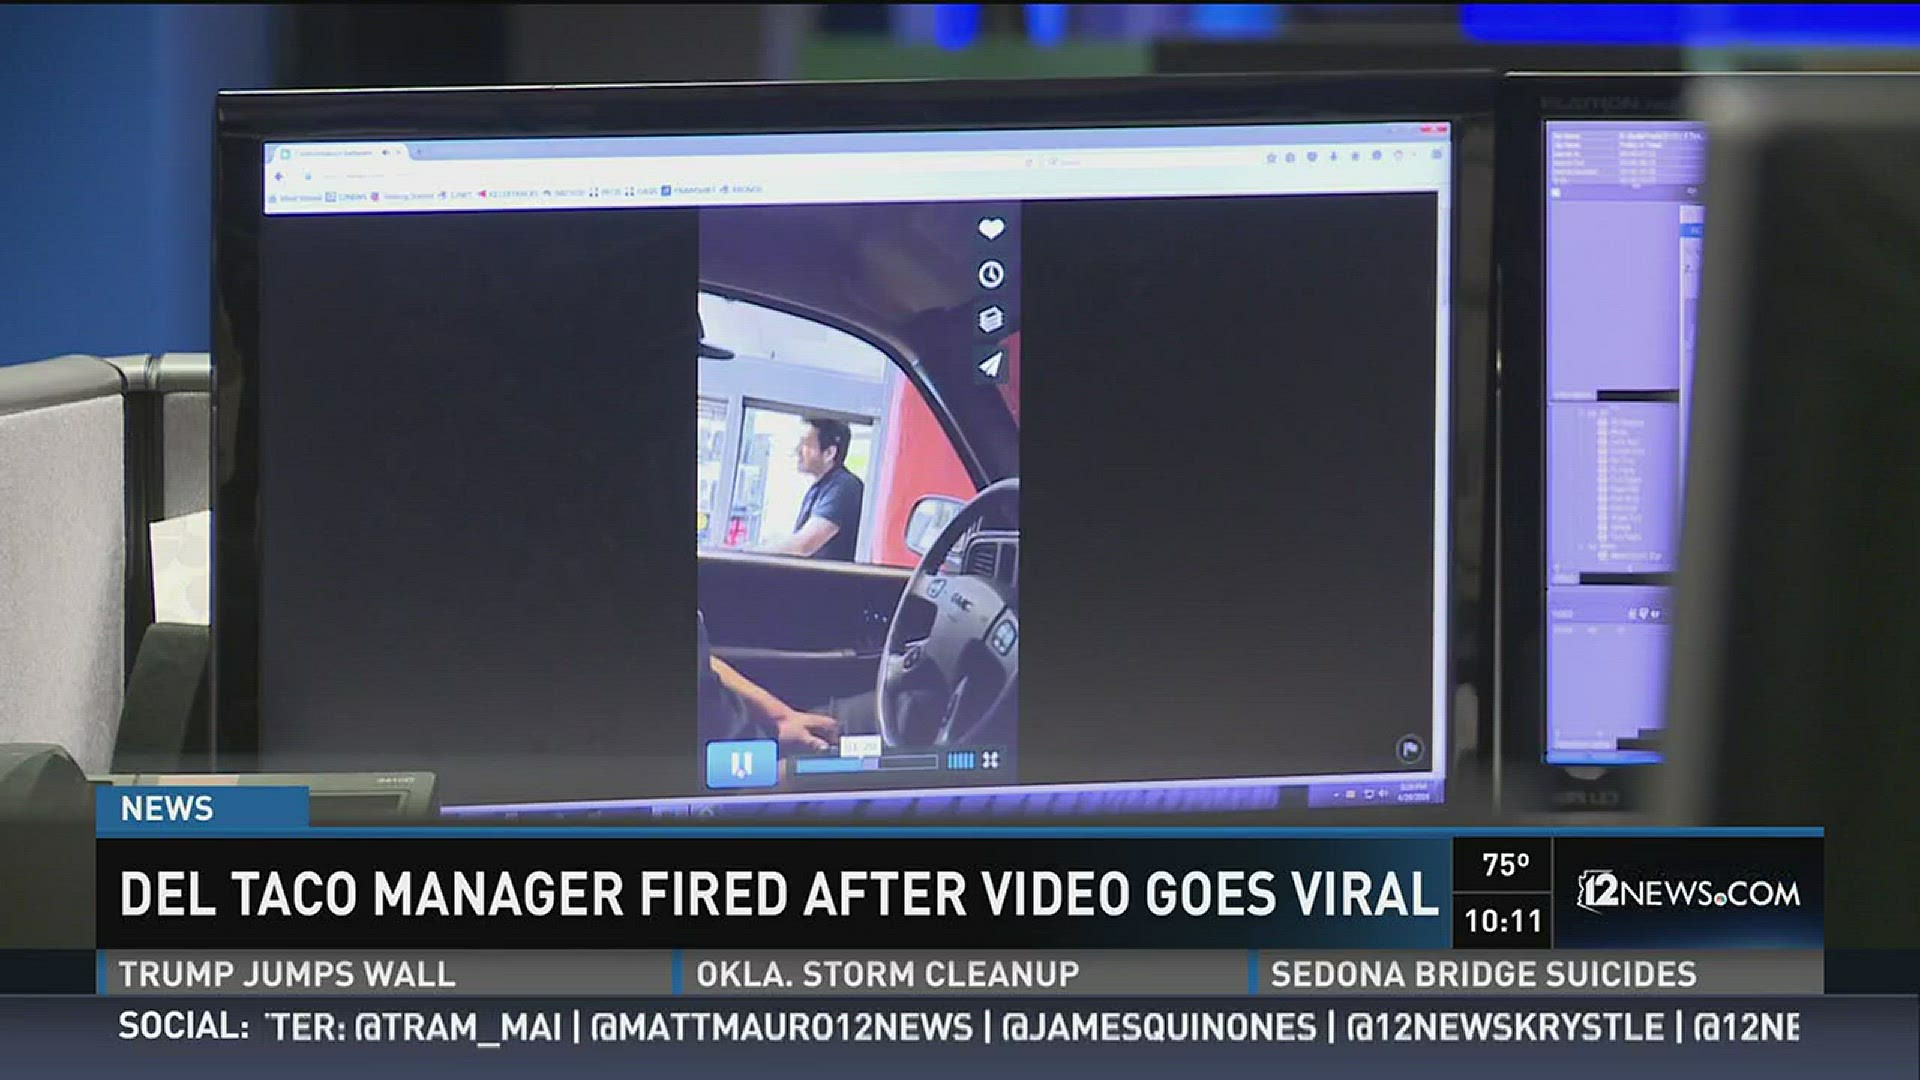 Del Taco manager fired after video goes viral.